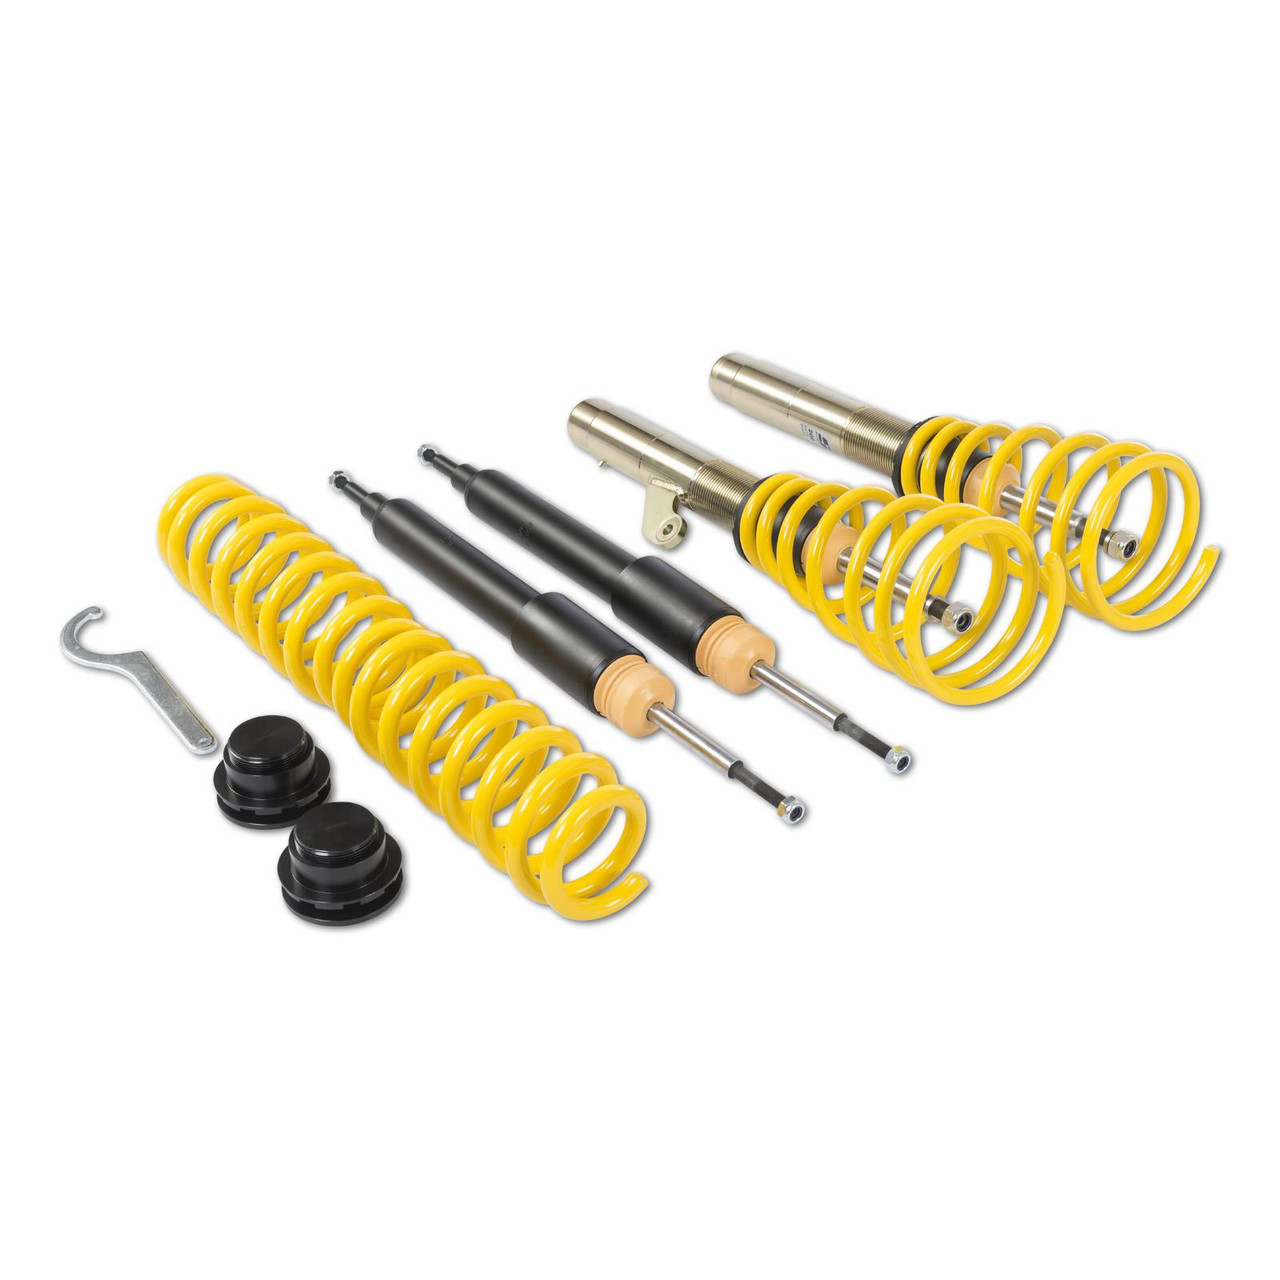 BMW ST XA Coilover Kit - ST Suspensions 18220022